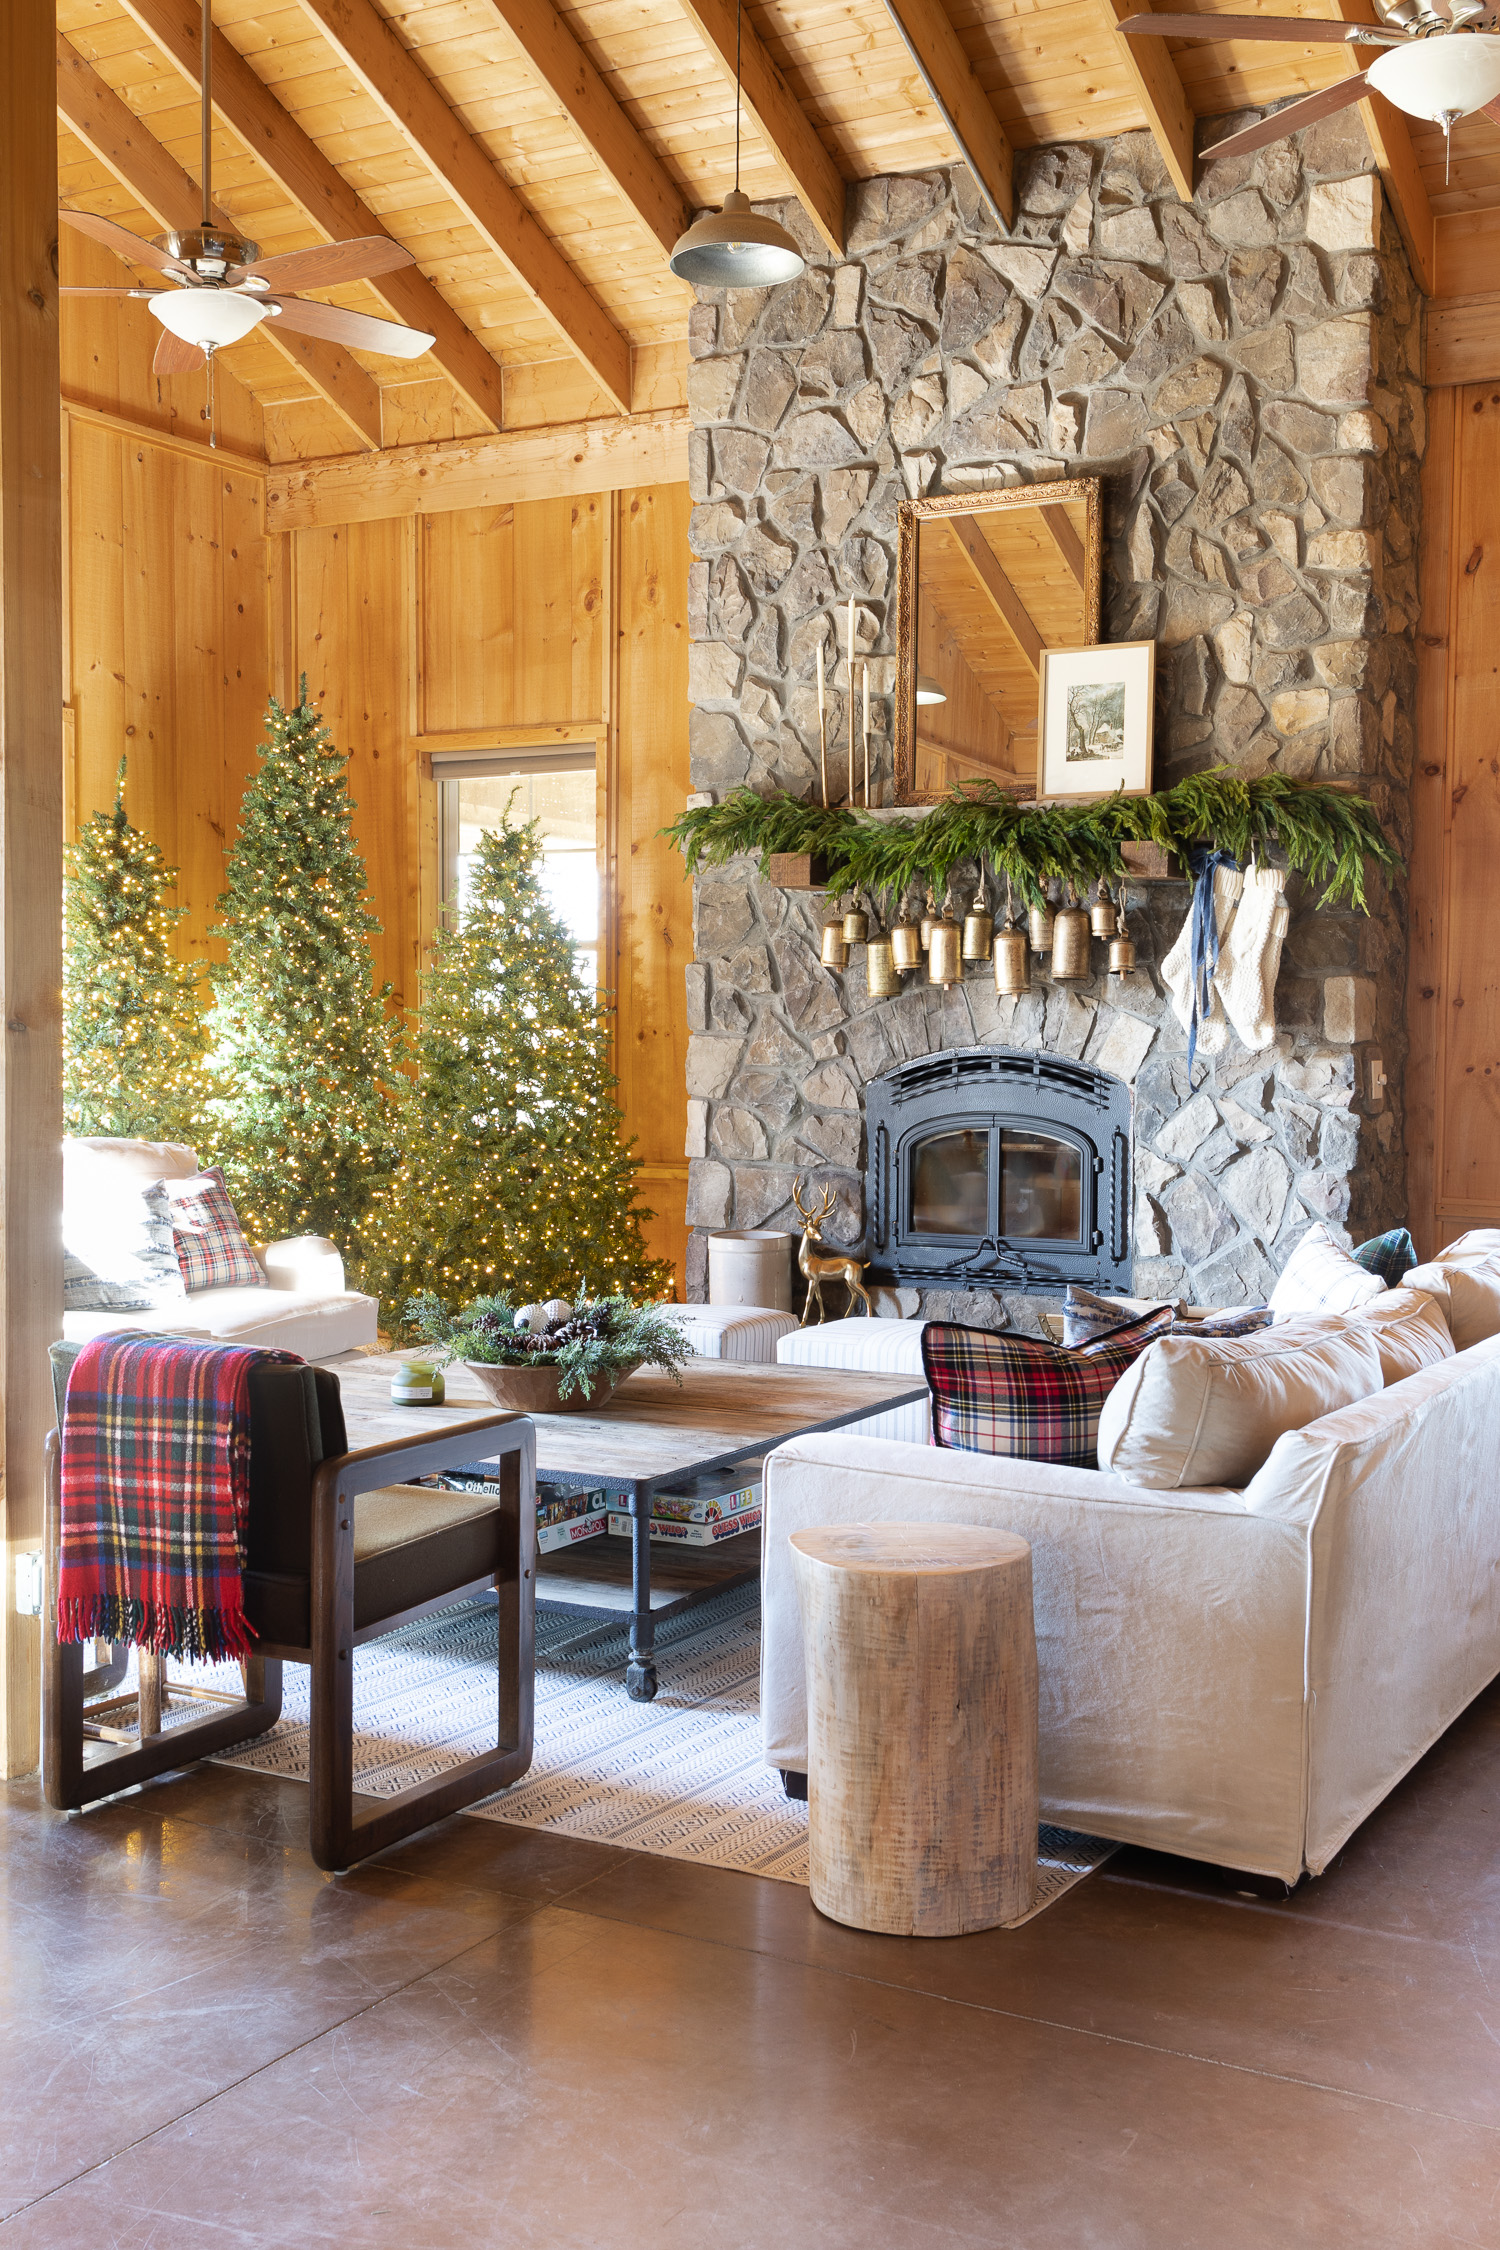 log cabin stone fireplace with brass bells hanging down from mantle